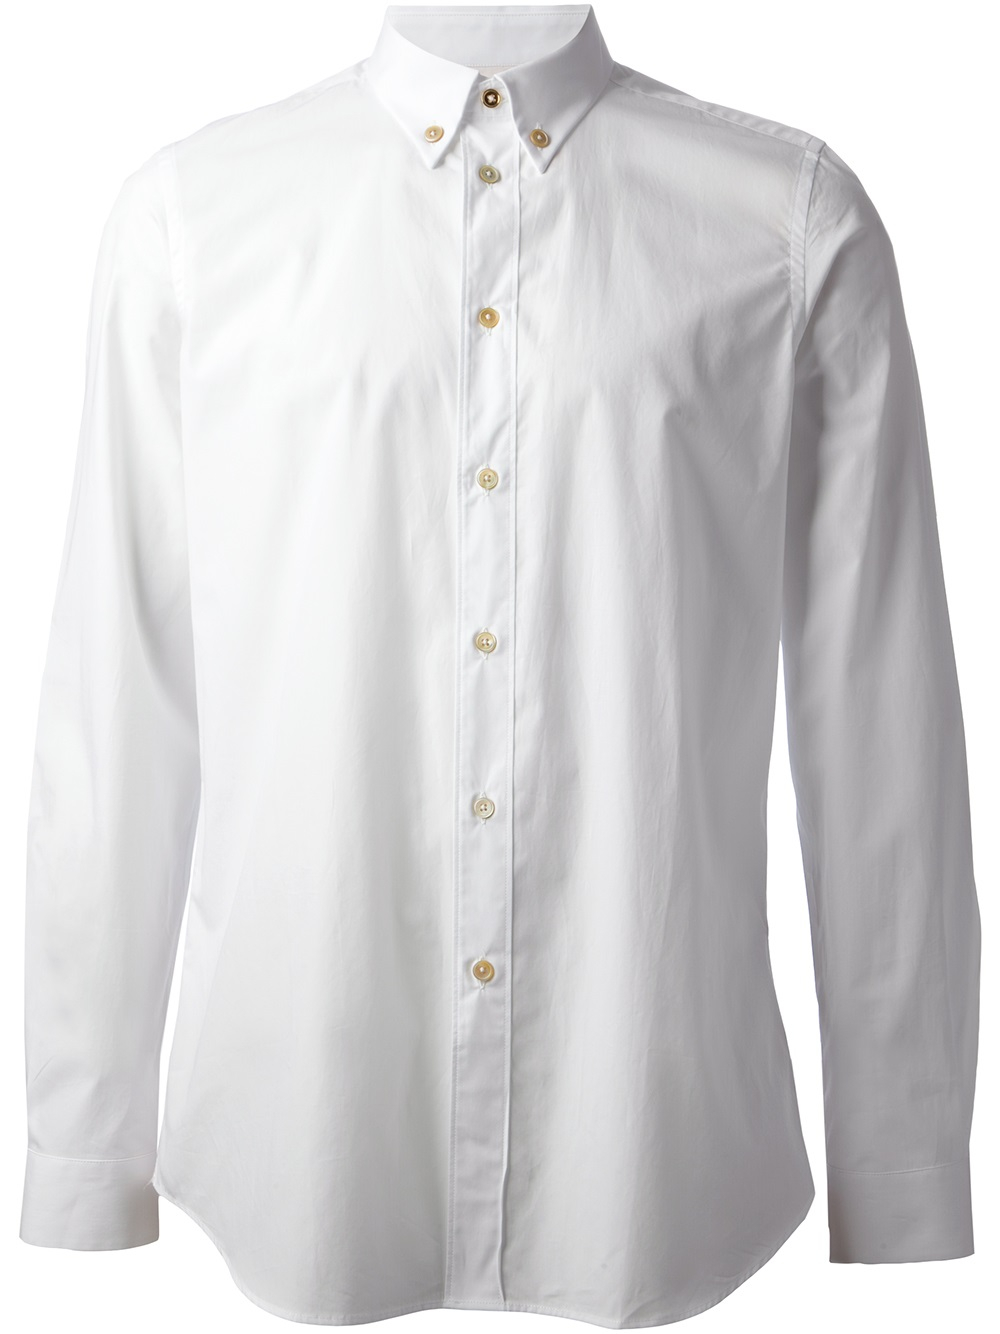 Download Lyst - Paul Smith Button Down Shirt in White for Men